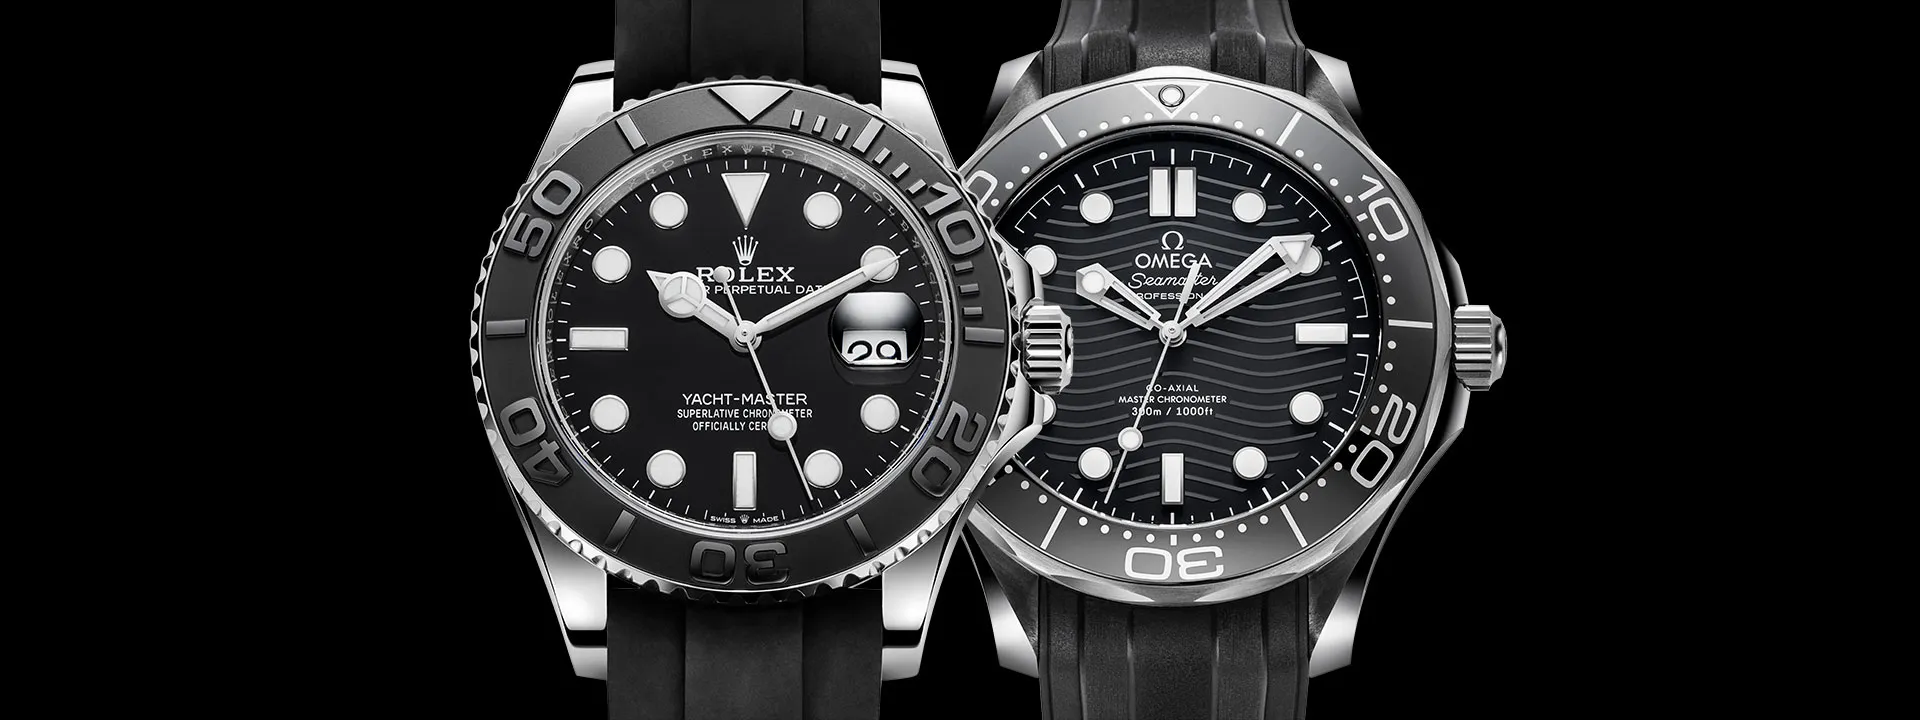 ROLEX vs. OMEGA. Which one to choose?